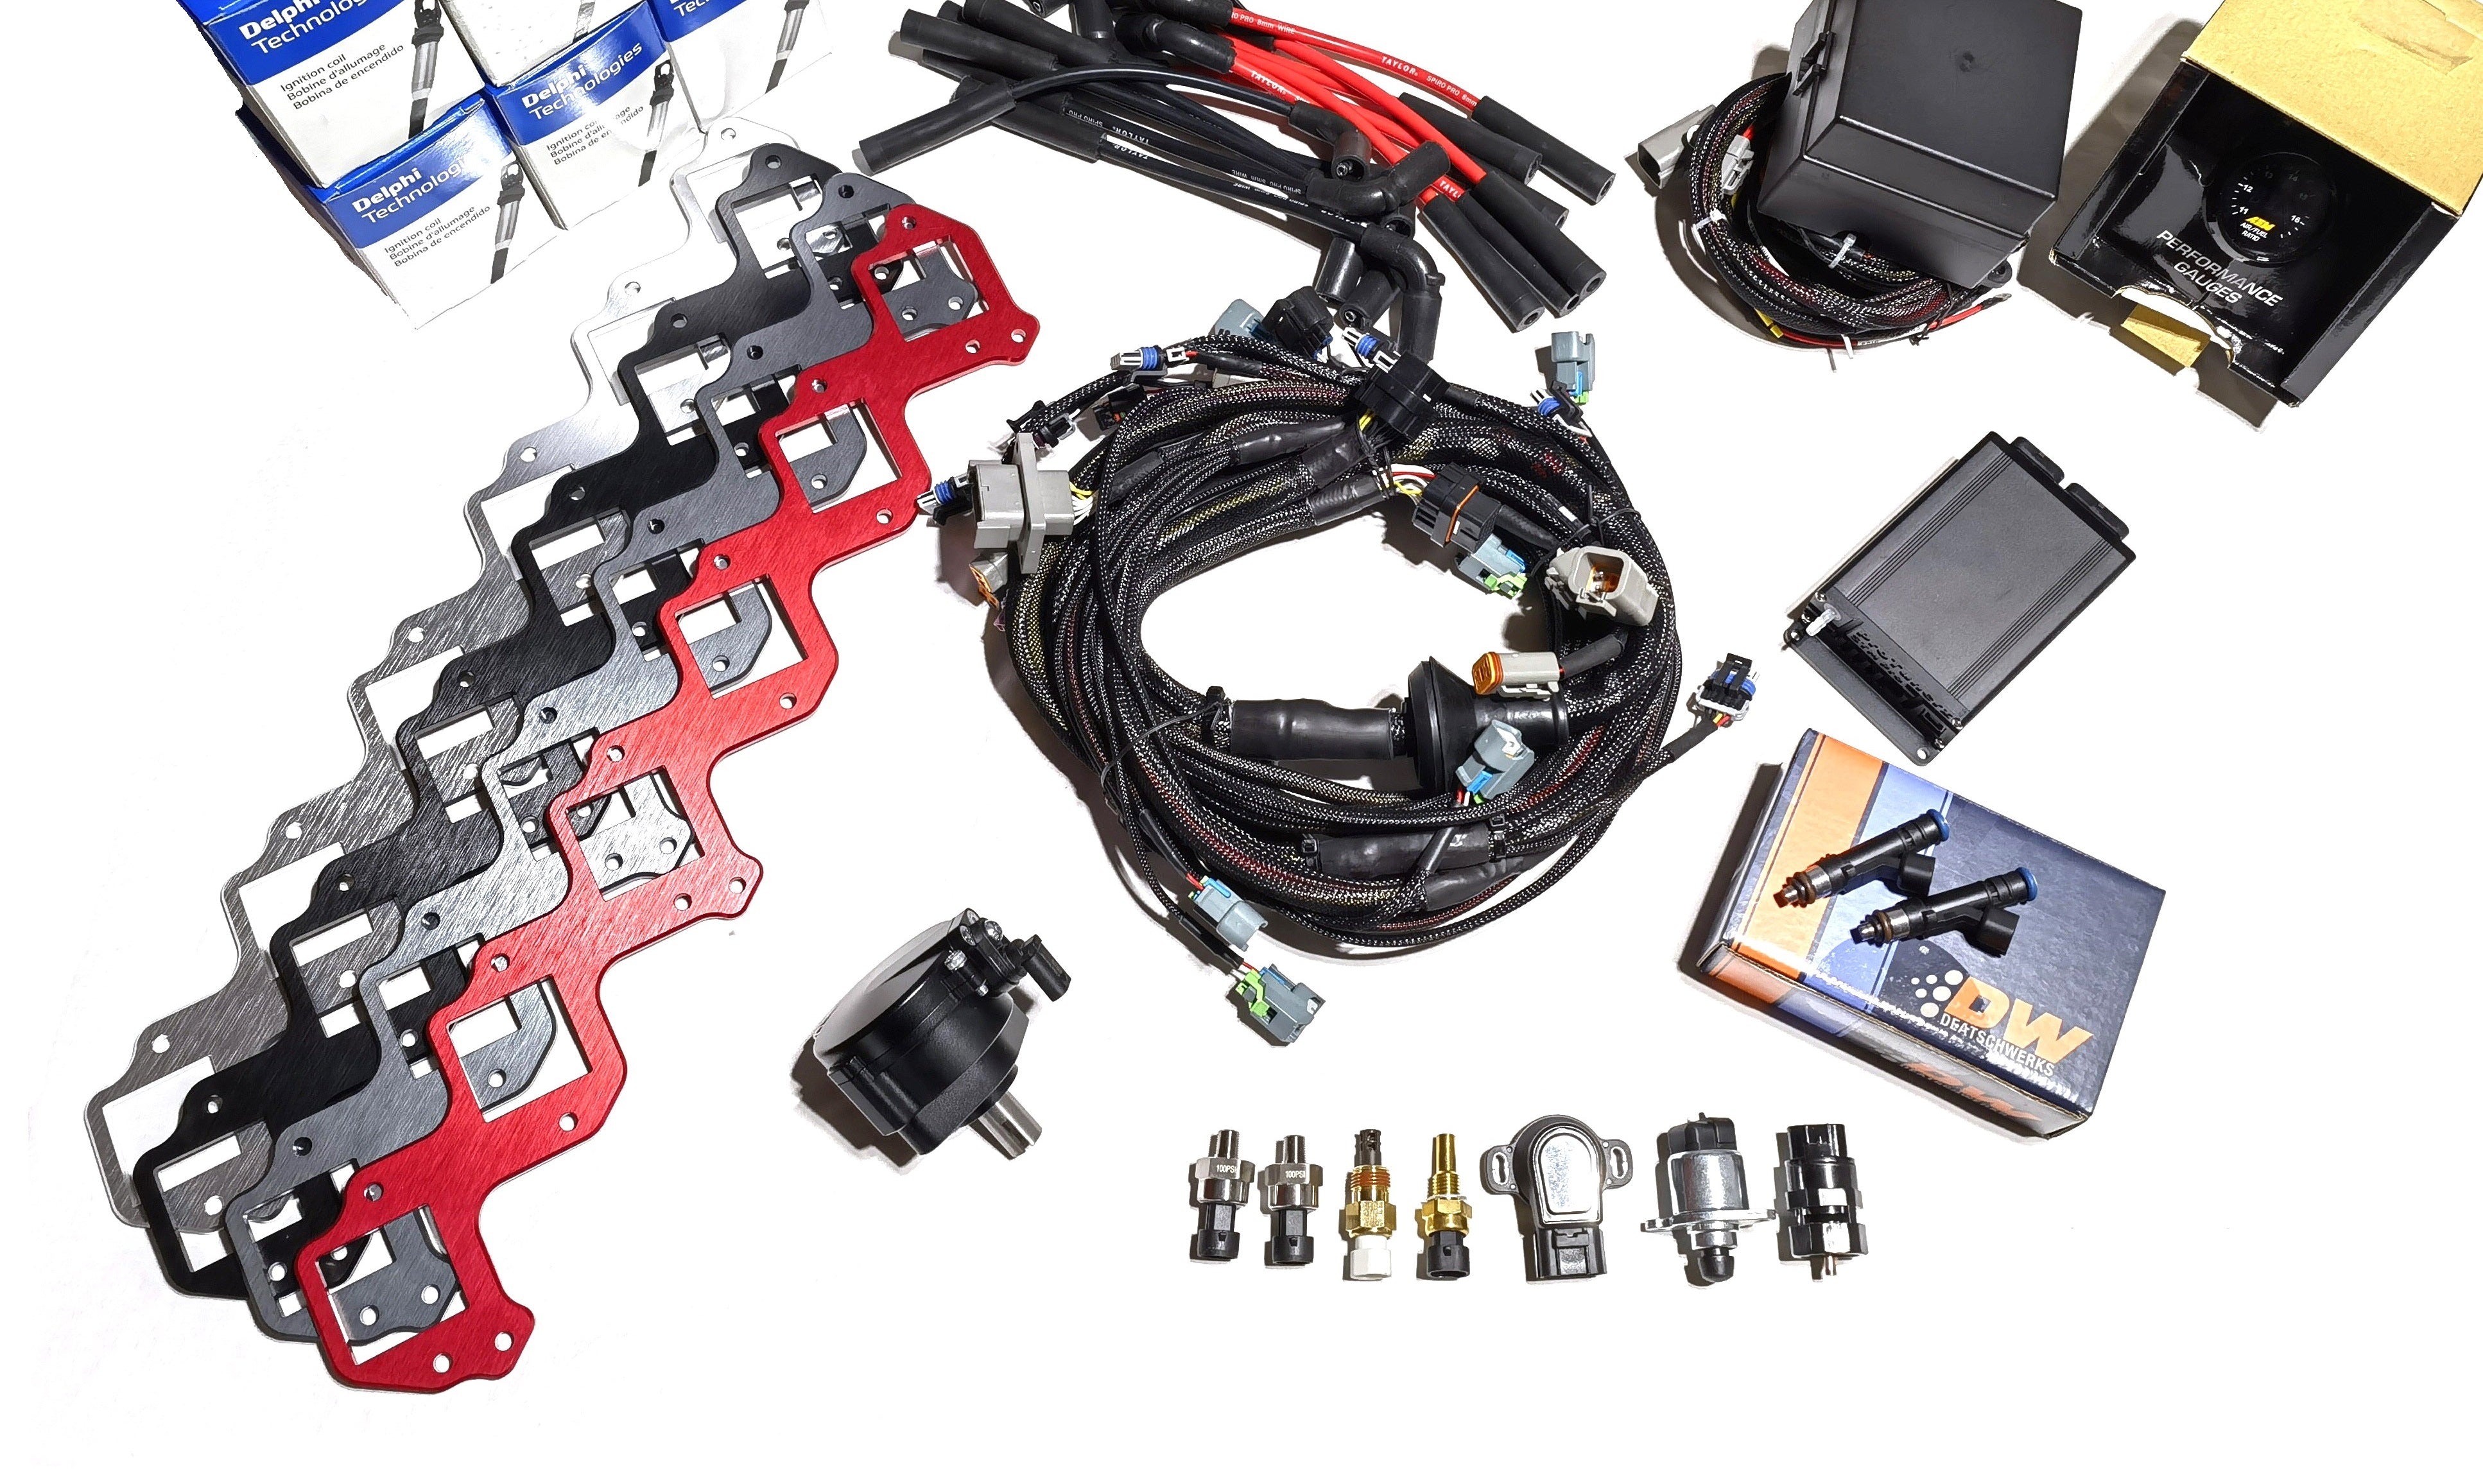 ProTunerz STM PRO + Plug and Play Harness Package for Datsun 